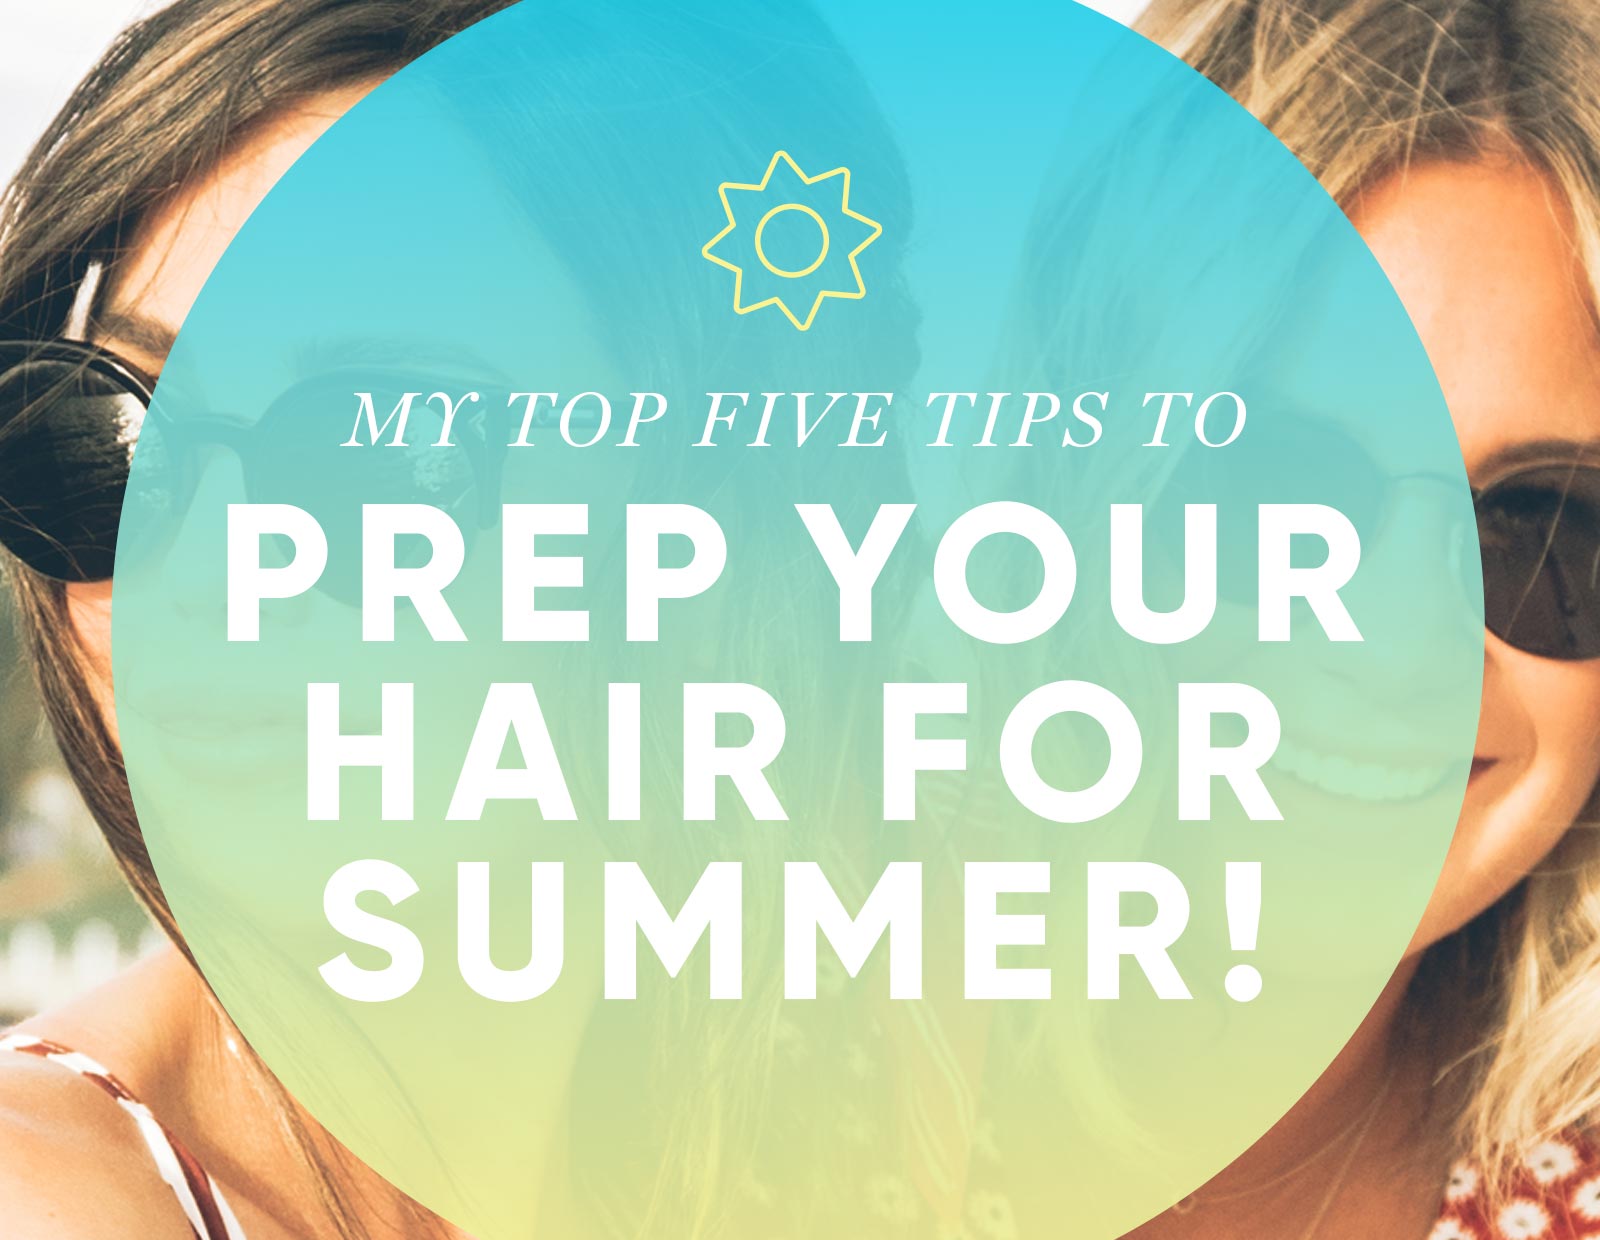 Prep Your Hair For Summer | Nicole's Hair Tips & Products | Shop Pomme